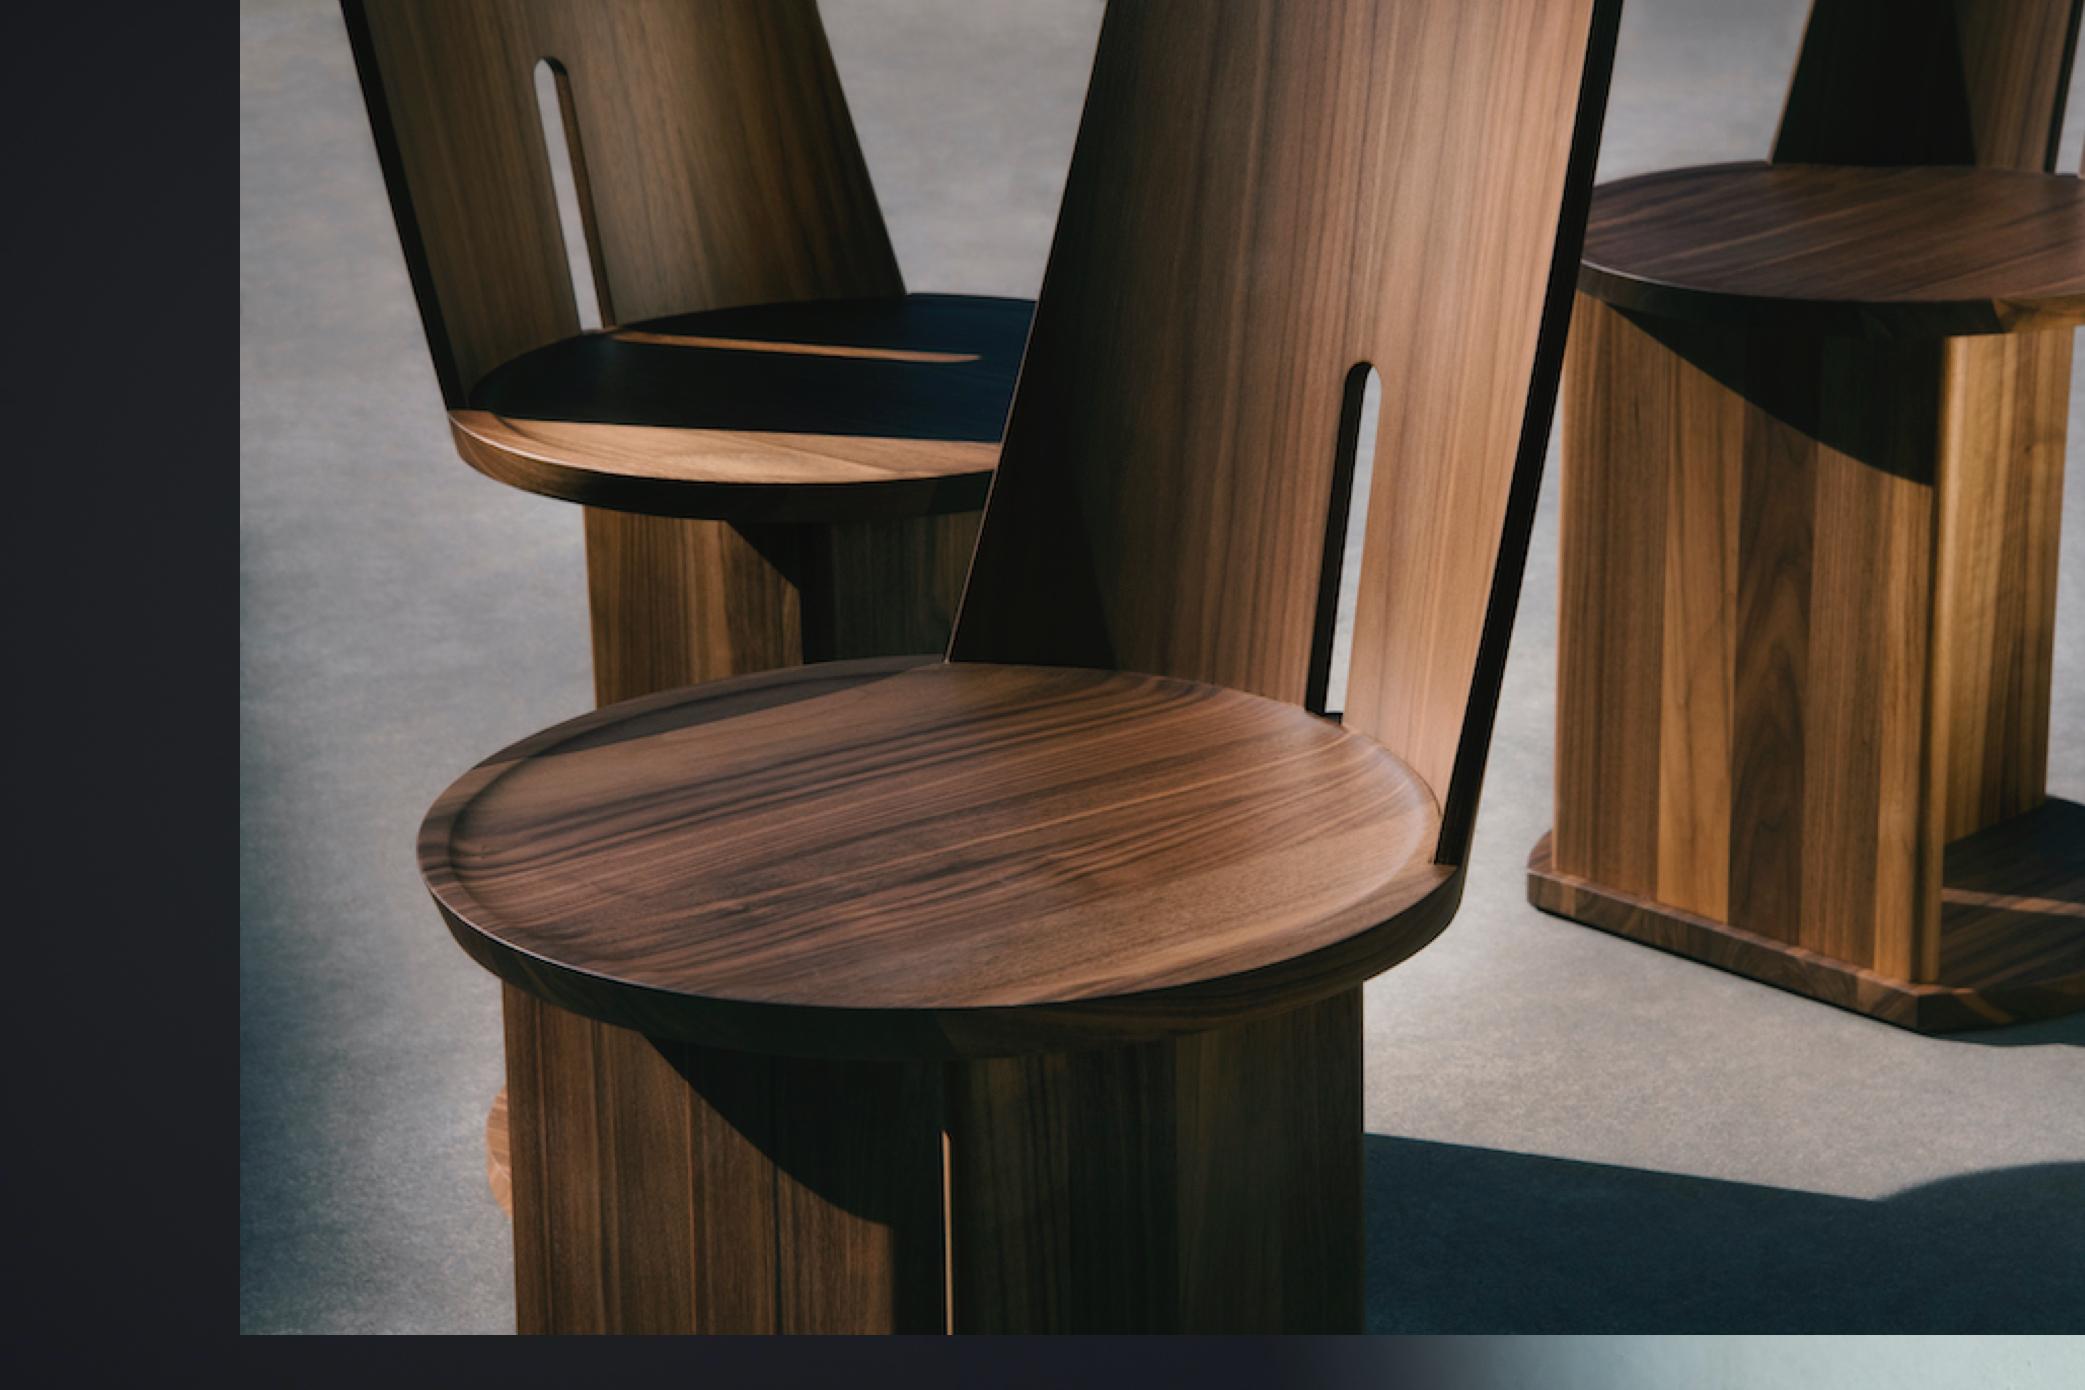 Wood La Manufacture-Paris Intersection Canaletto Walnut Chair Designed by Neri & Hu For Sale